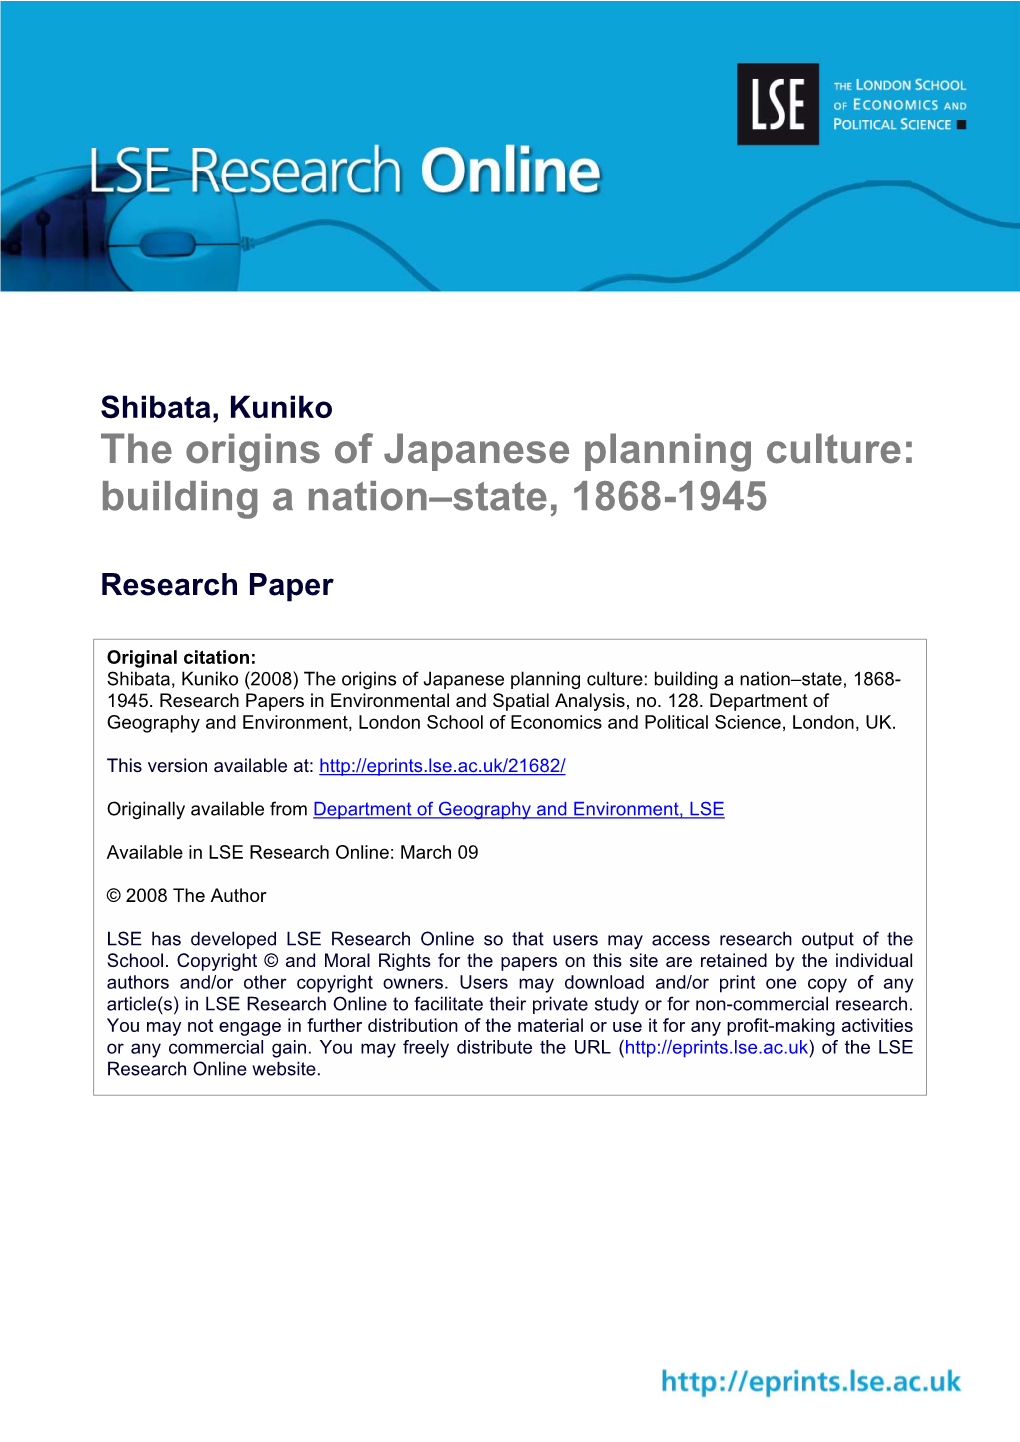 The Origins of Japanese Planning Culture: Building a Nation–State, 1868-1945